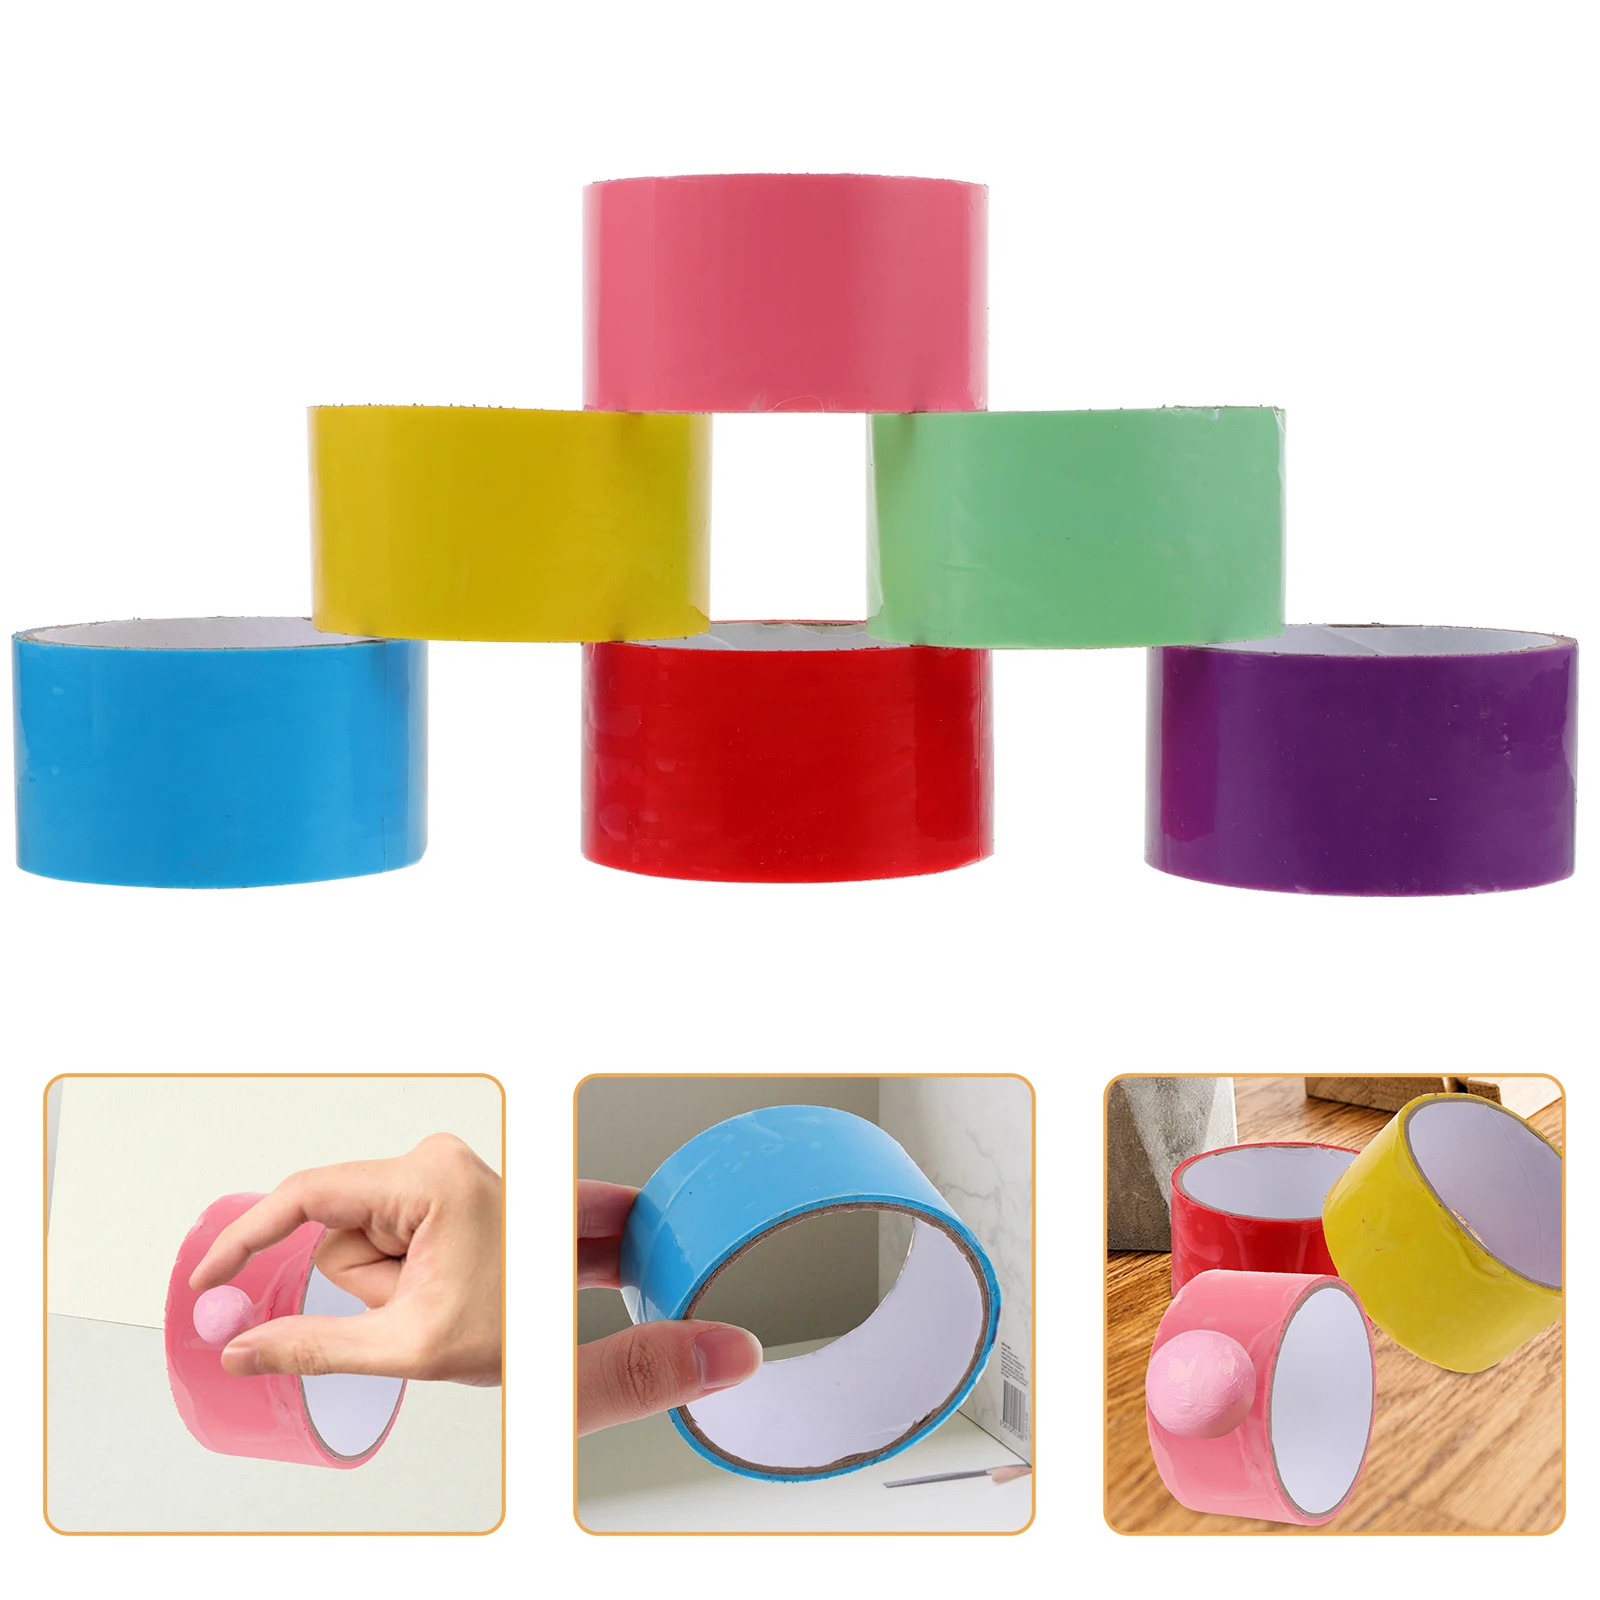 

6 Rolls of Adhesive Tapes Colored Tapes Funny DIY Sticky Tapes Decompression Sticky Ball Tapes Gift for Kids DIY Relaxing Toy